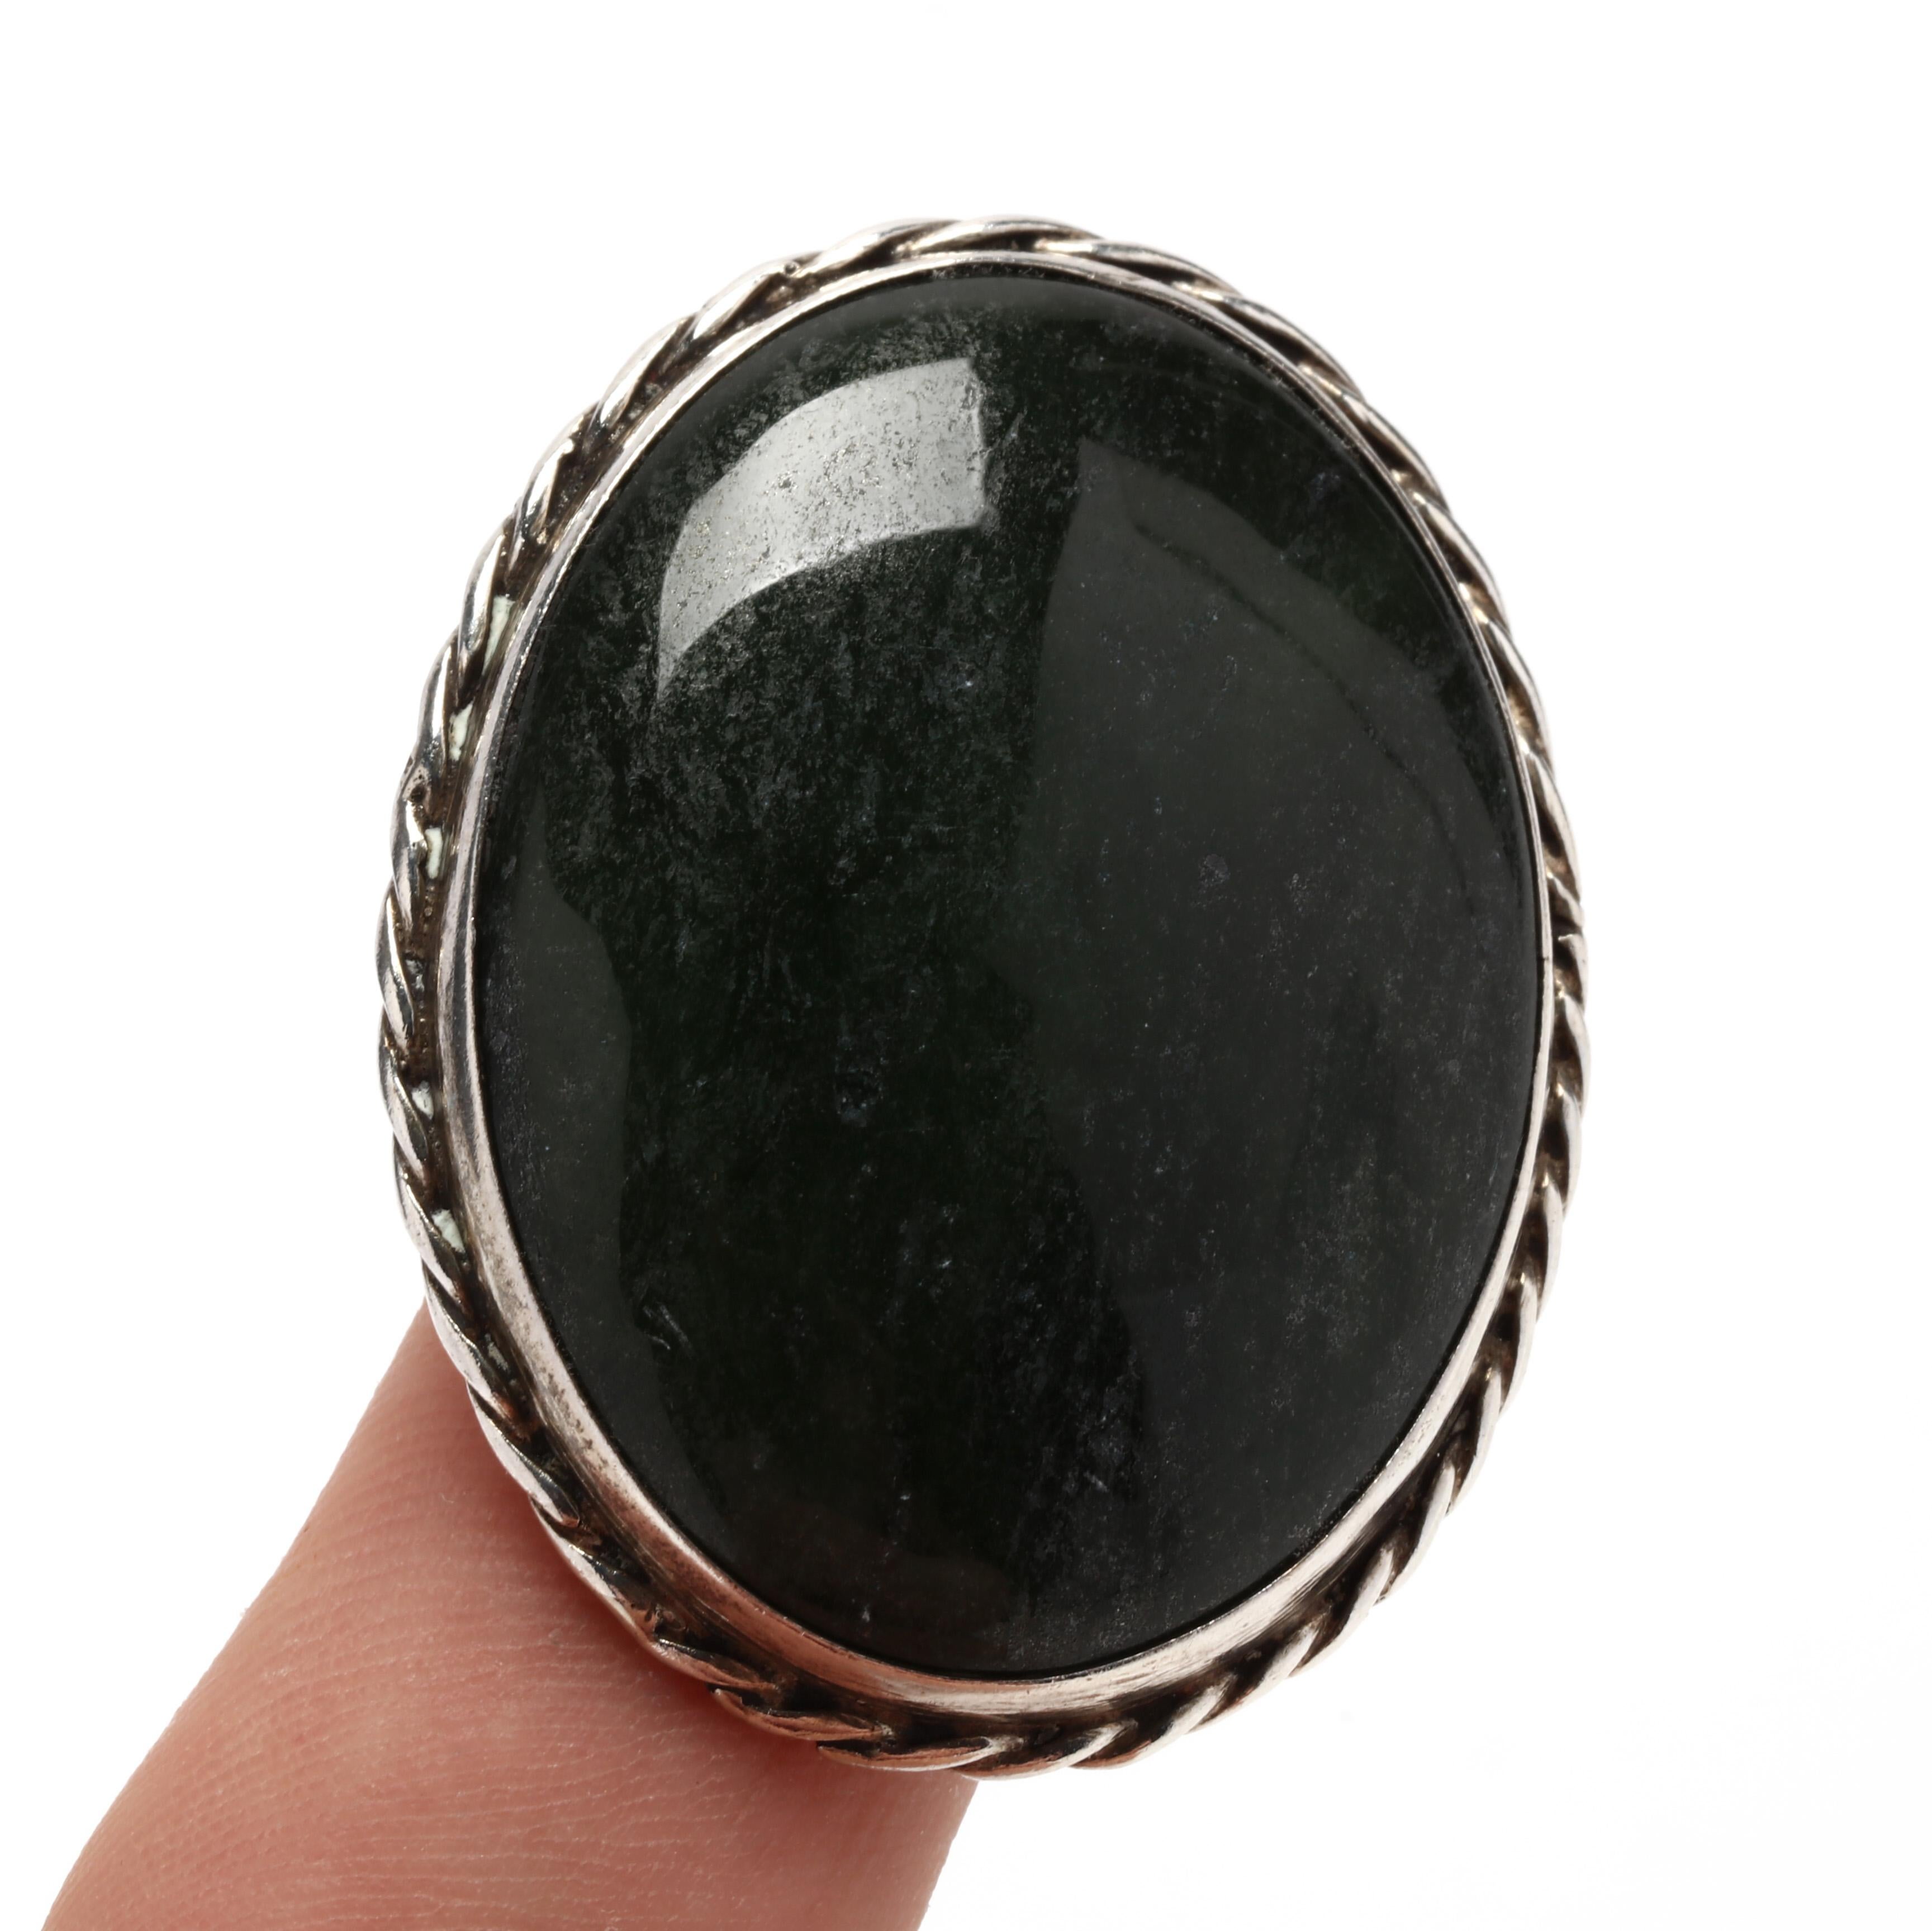 This stunning oval nephrite jade pendant is handcrafted with sterling silver and is the perfect addition to any jewelry collection. Crafted from natural nephrite jade, this pendant measures 1.75 inches long and is polished to a beautiful, glossy